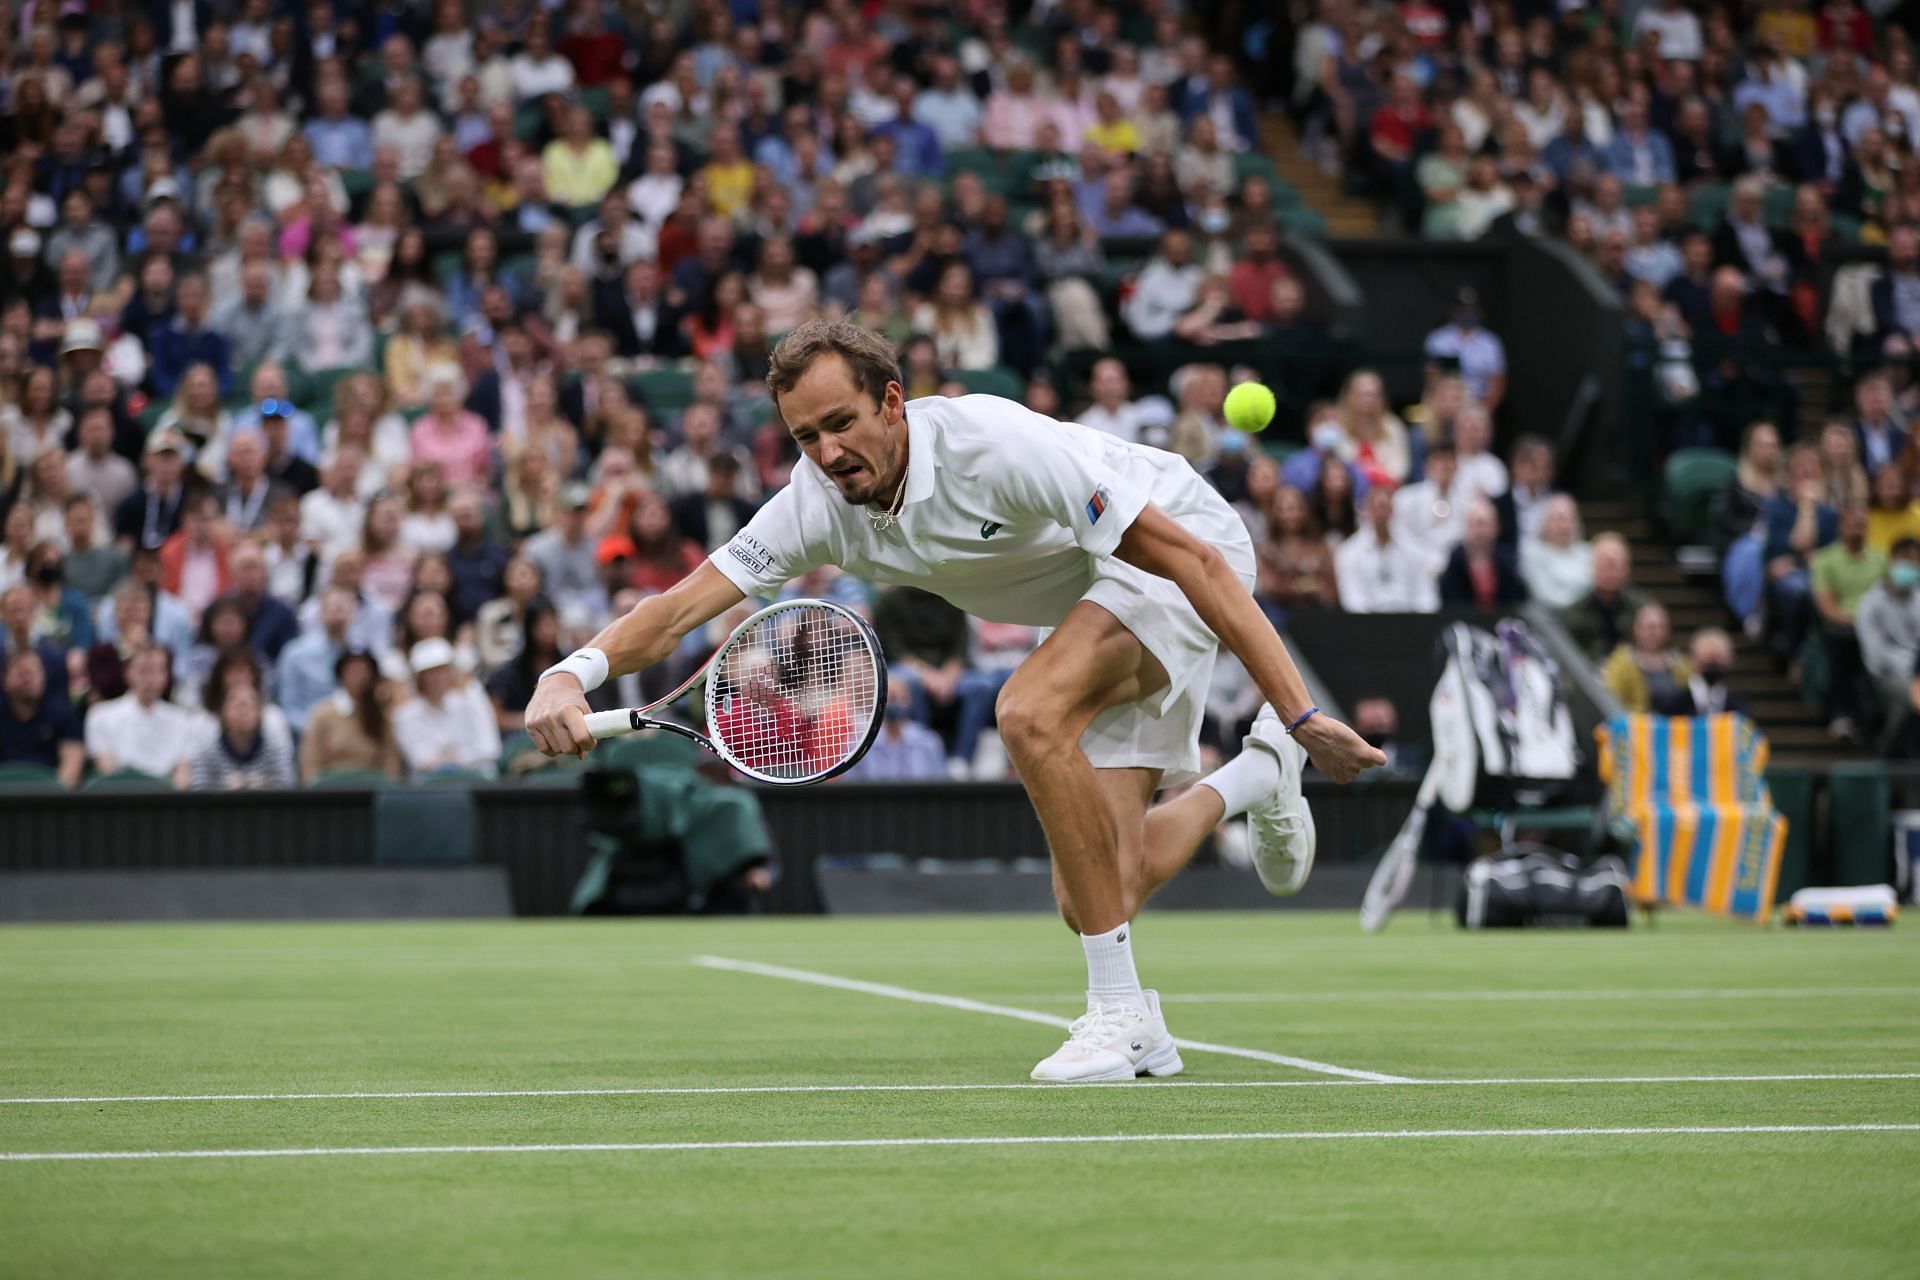 Daniil Medvedev in action at the 2021 Wimbledon Championships